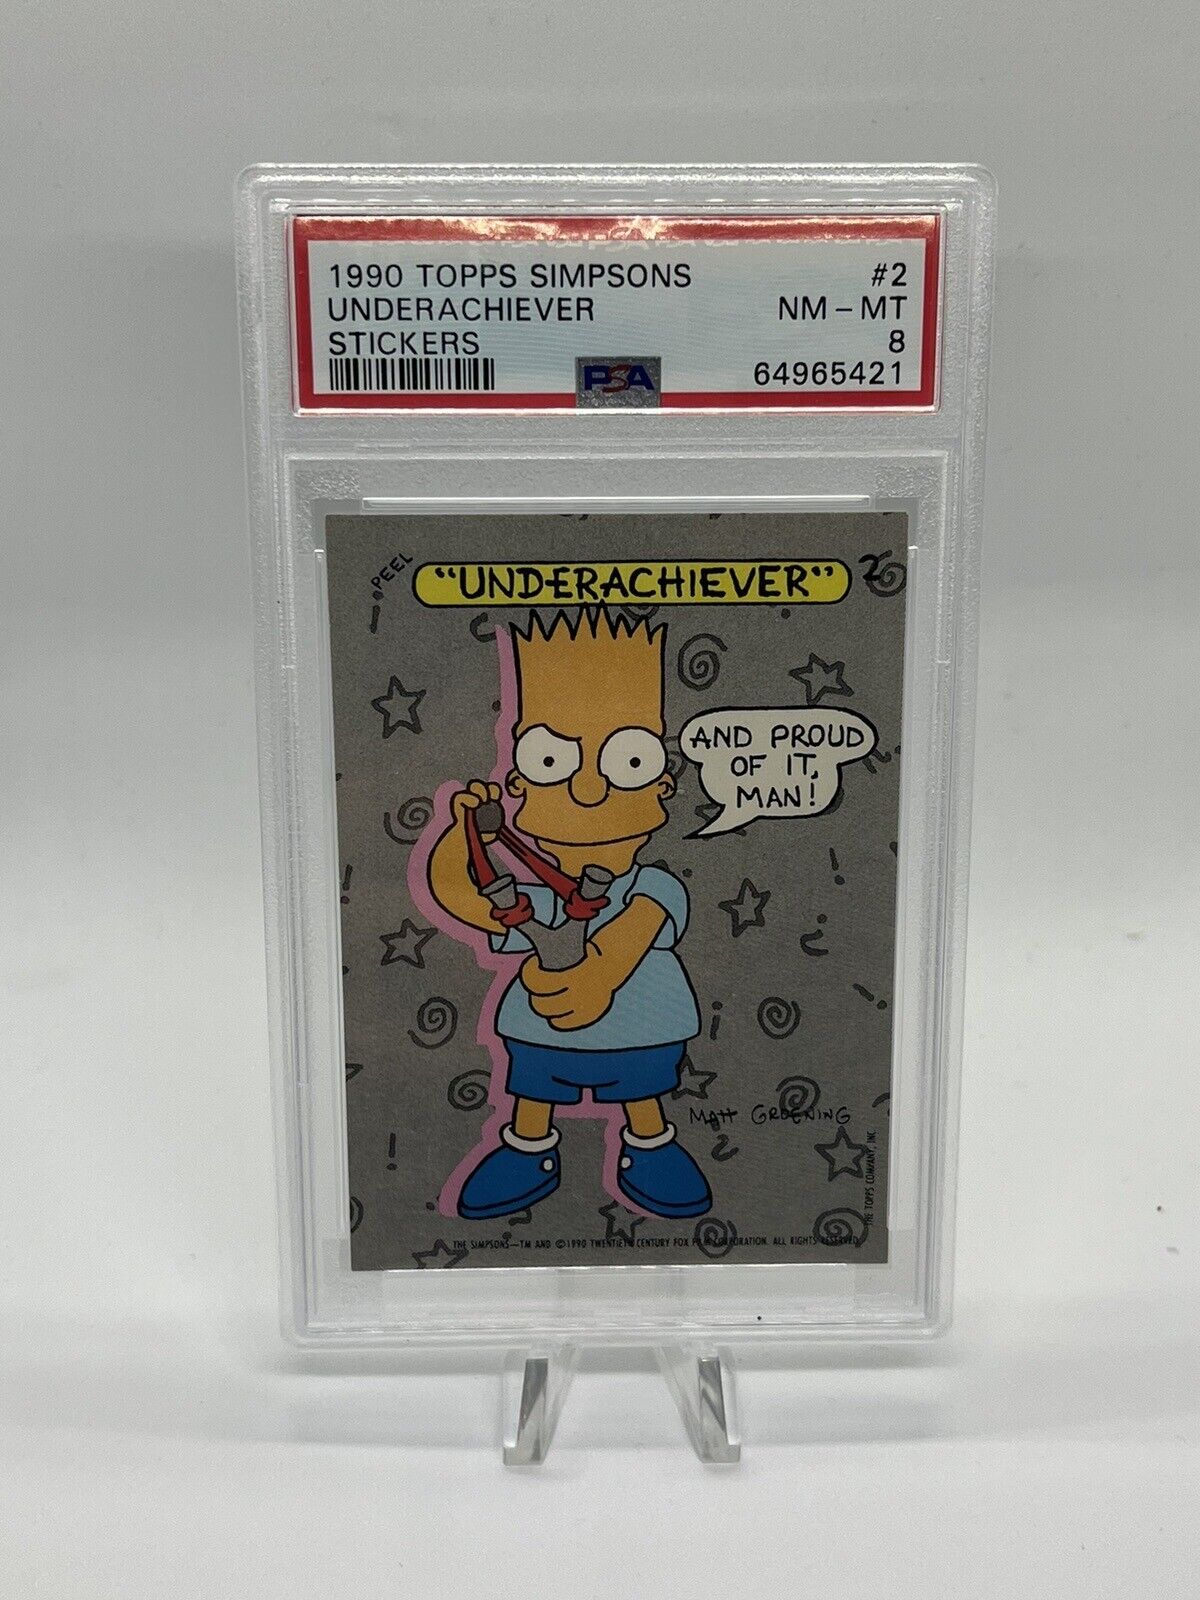 1990 TOPPS THE SIMPSONS STICKERS #2 BART SIMPSON UNDERACHIEVER PSA 8 NM-MT